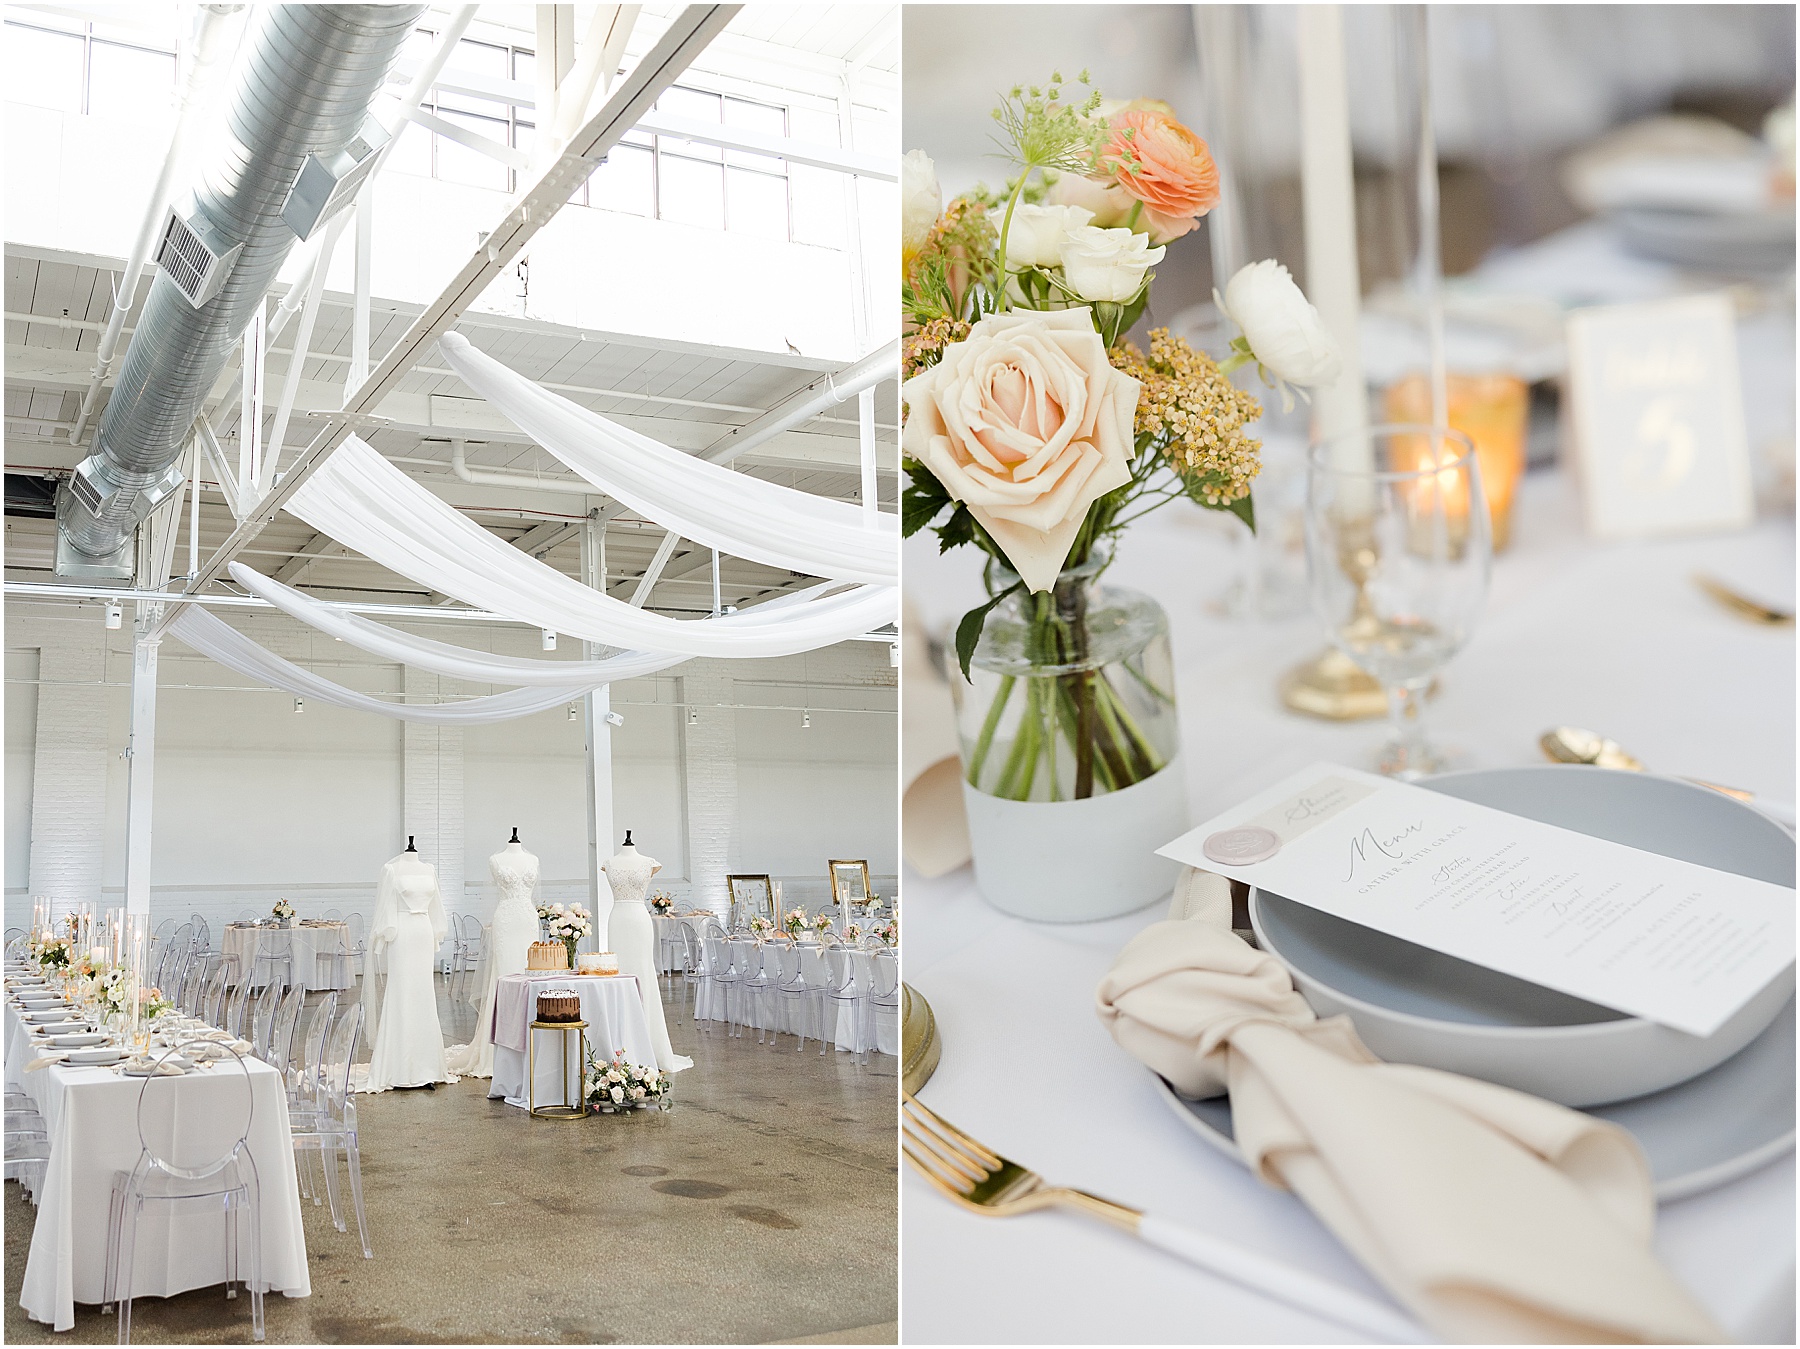 Styled Shoot and Dinner at Wedding Photographer Educational Conference